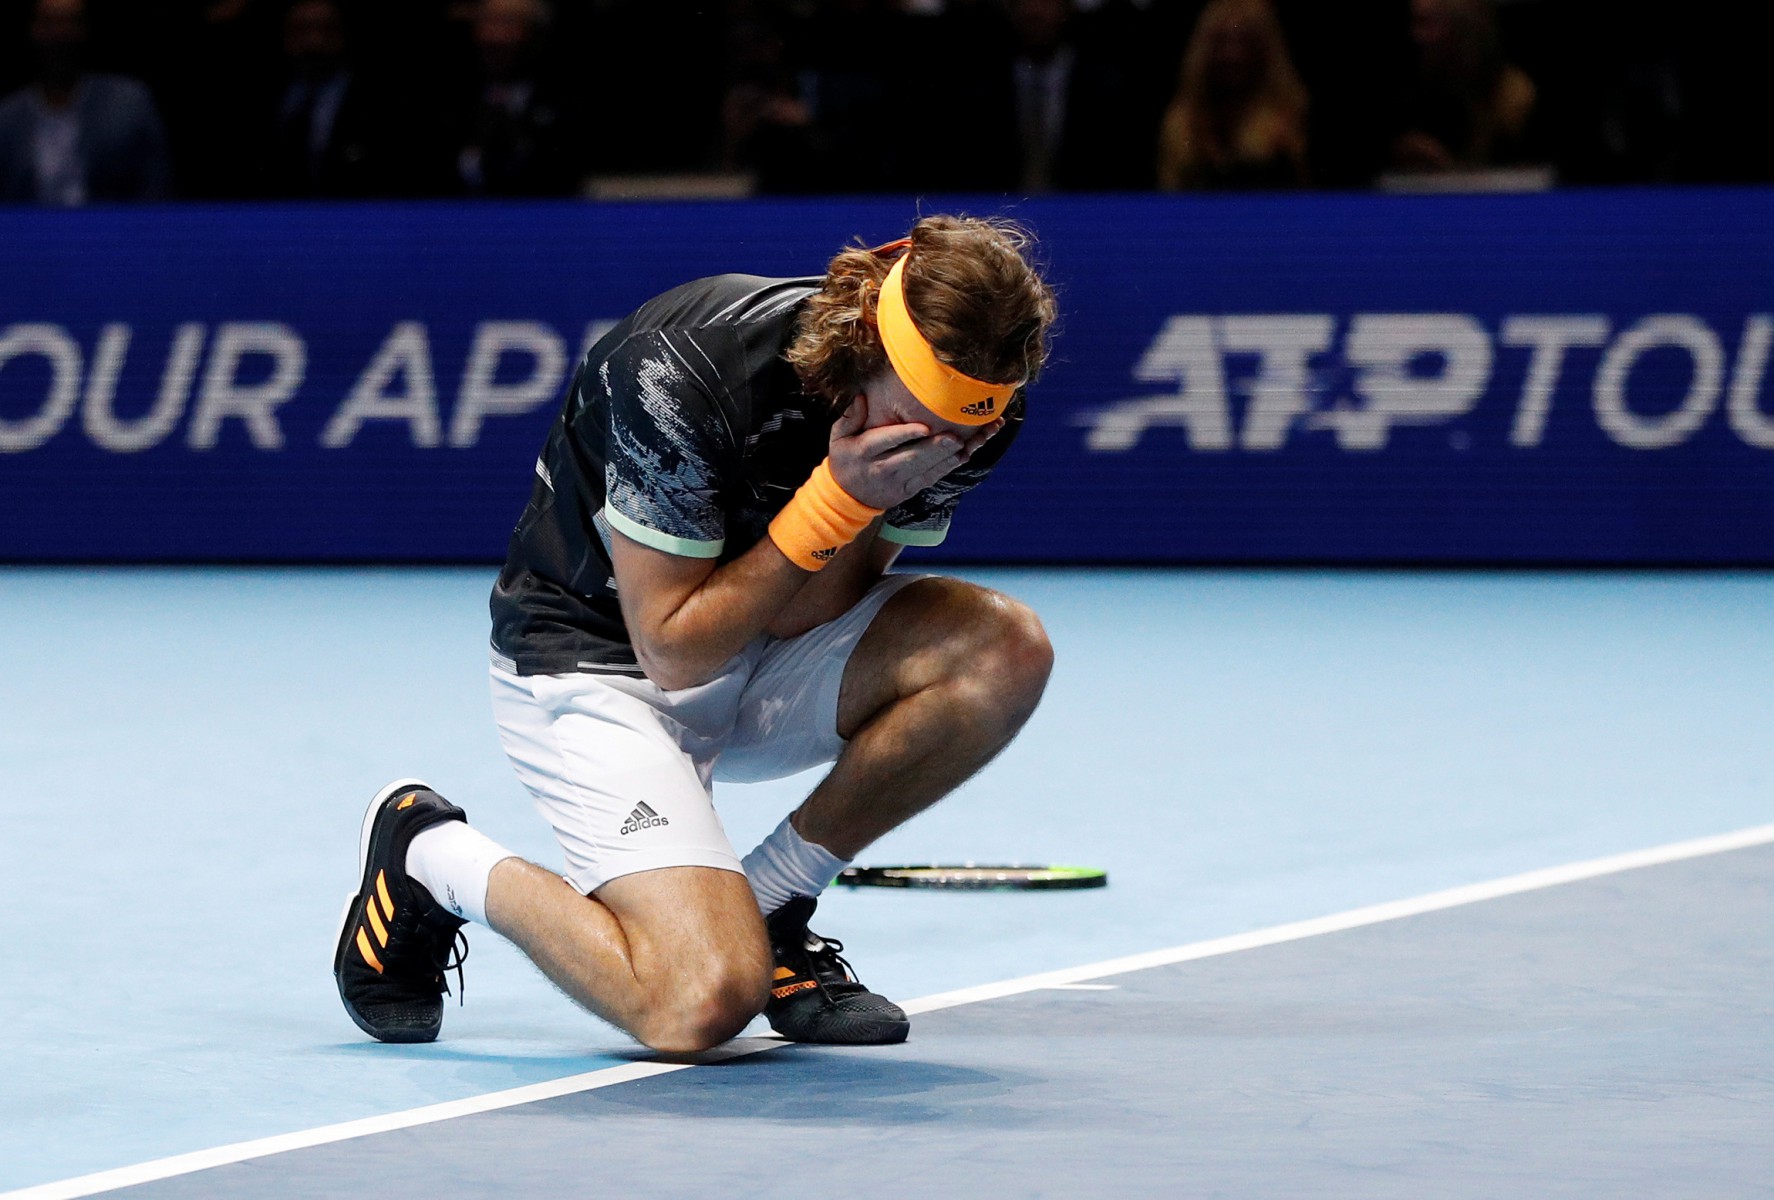 The Greek sensation collapsed to the court after a thrilling 6-7 6-2 7-6 victory which lasted two hours and 35 minutes